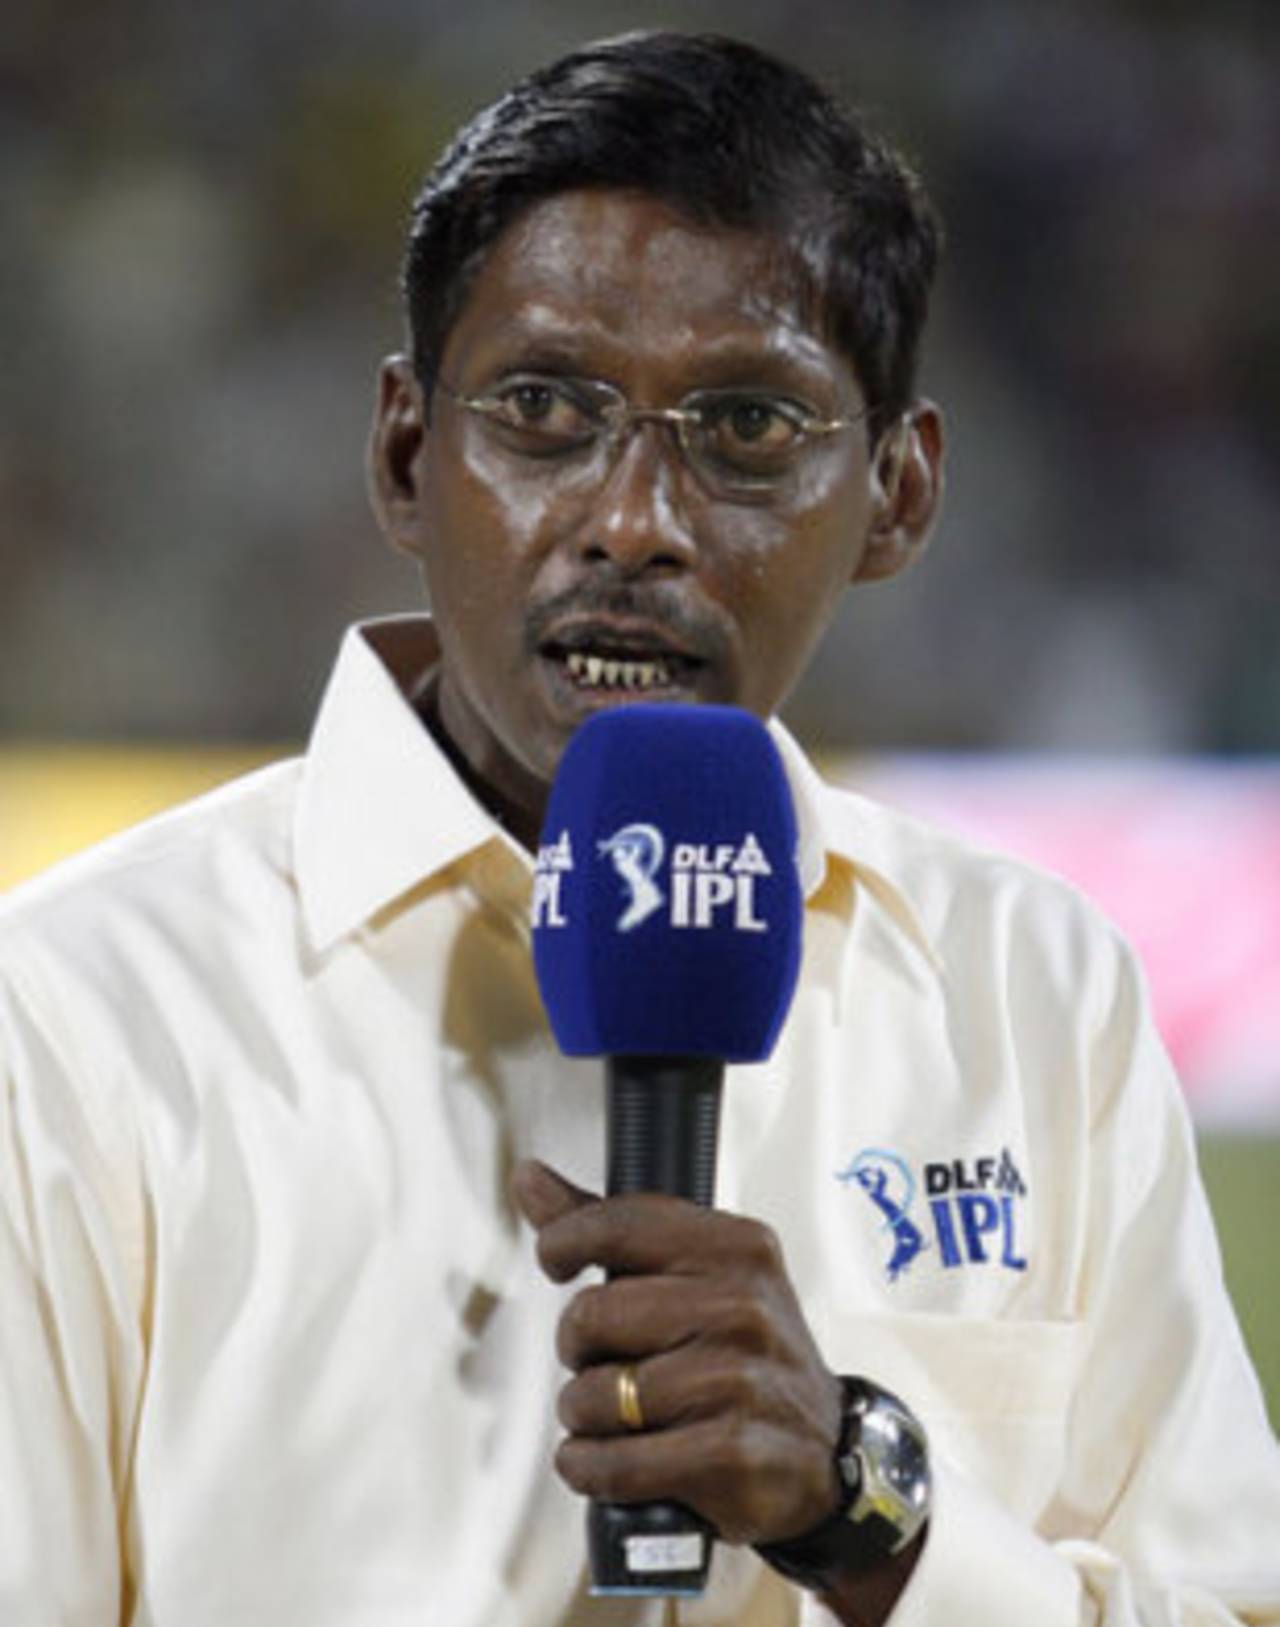 File photo: L Sivaramakrishnan replaced Tim May as a players' representative on the ICC cricket committee and will serve on the committee for a period of three years&nbsp;&nbsp;&bull;&nbsp;&nbsp;BCCI